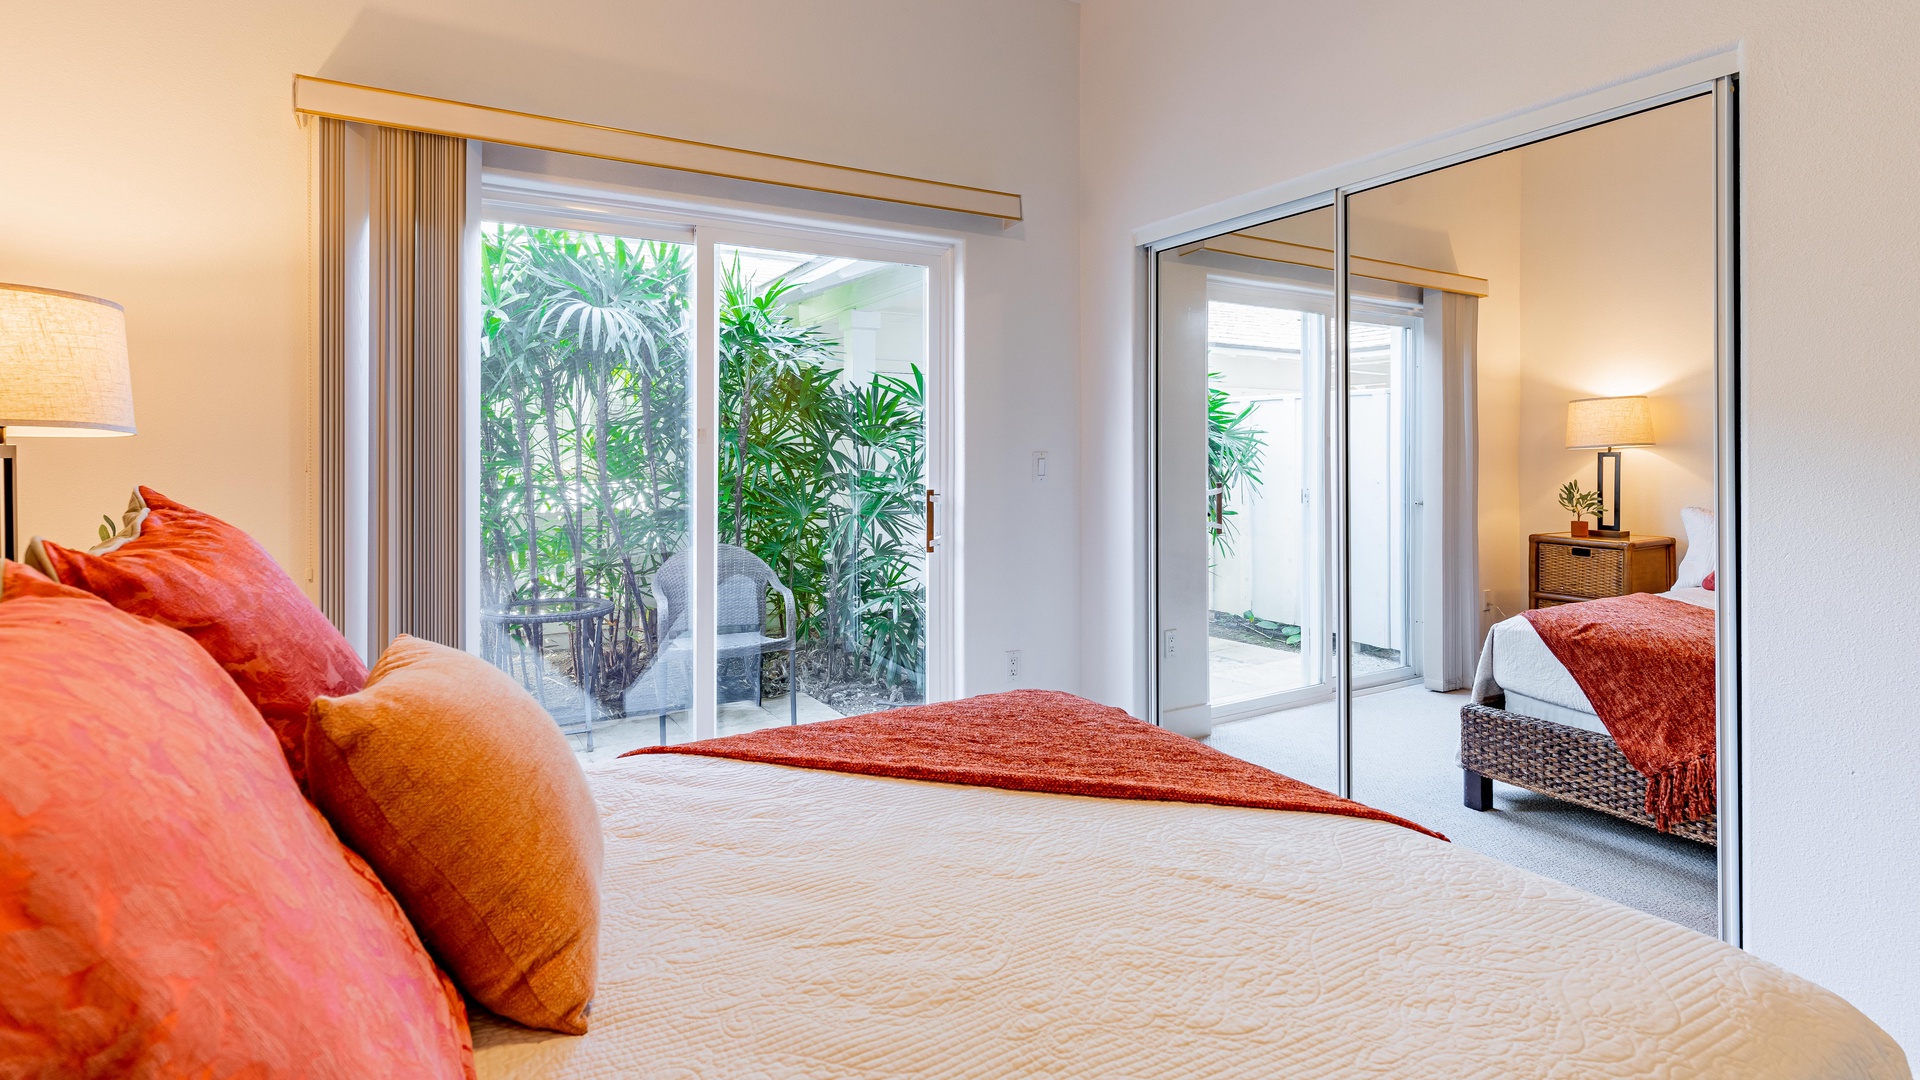 Kapolei Vacation Rentals, Coconut Plantation 1074-1 - The first floor guest bedroom with access to a small private lanai.